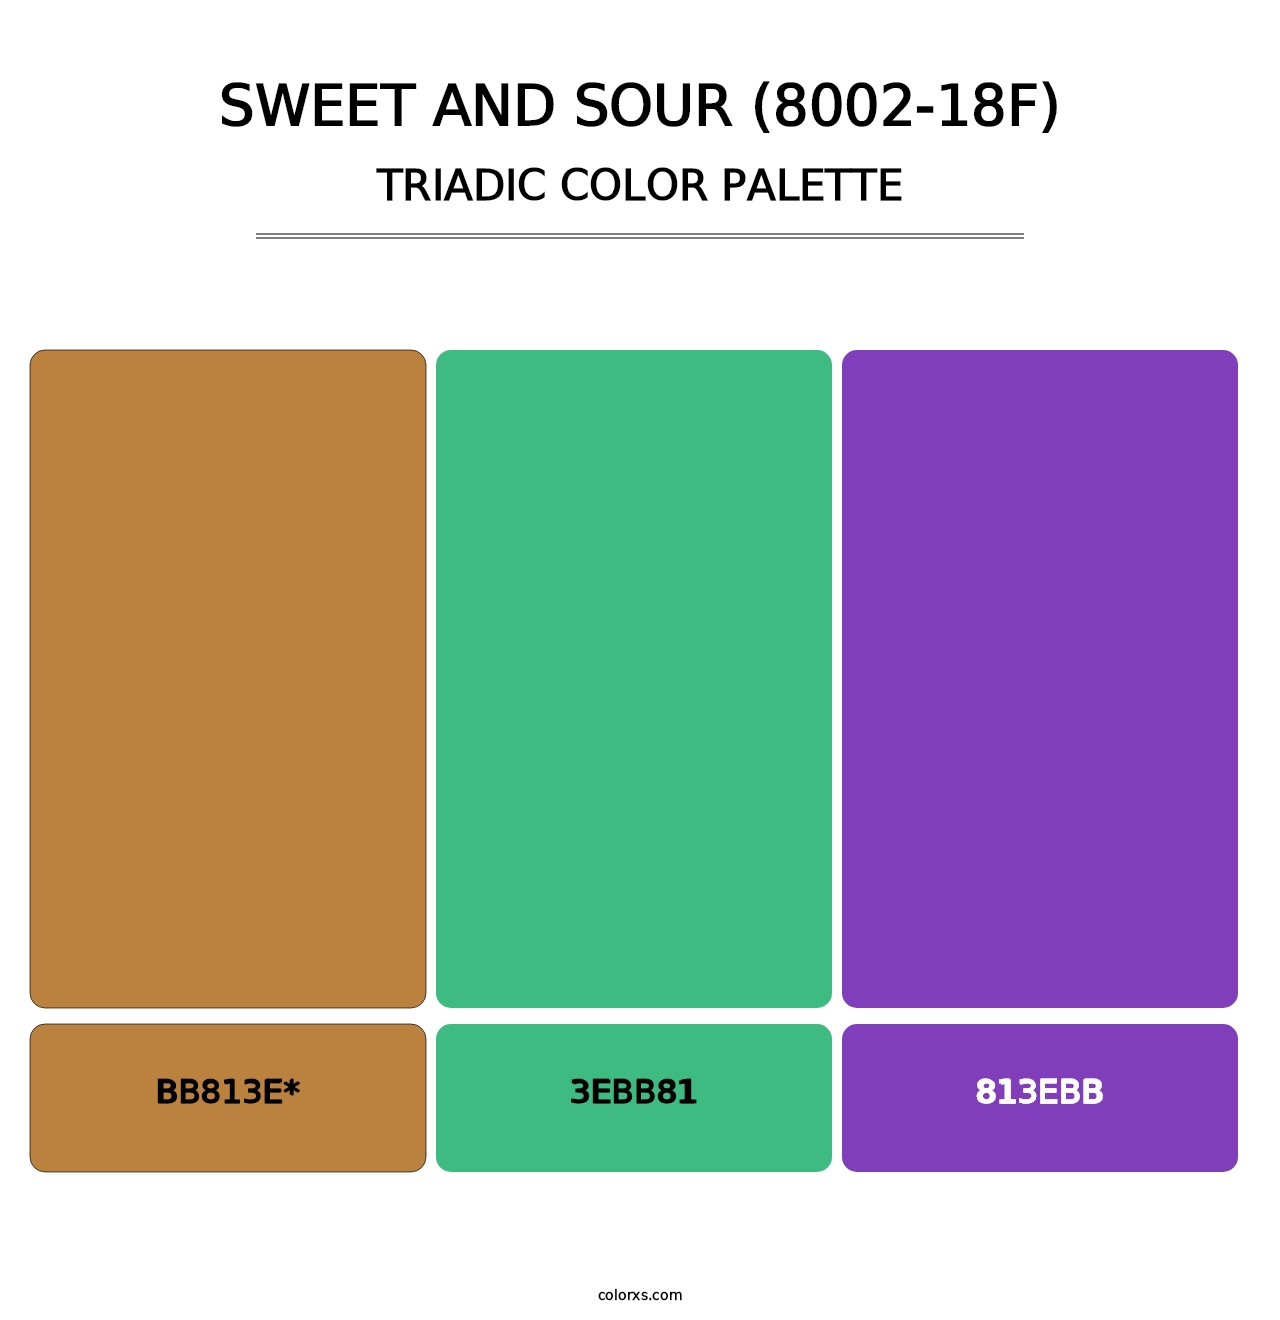 Sweet and Sour (8002-18F) - Triadic Color Palette